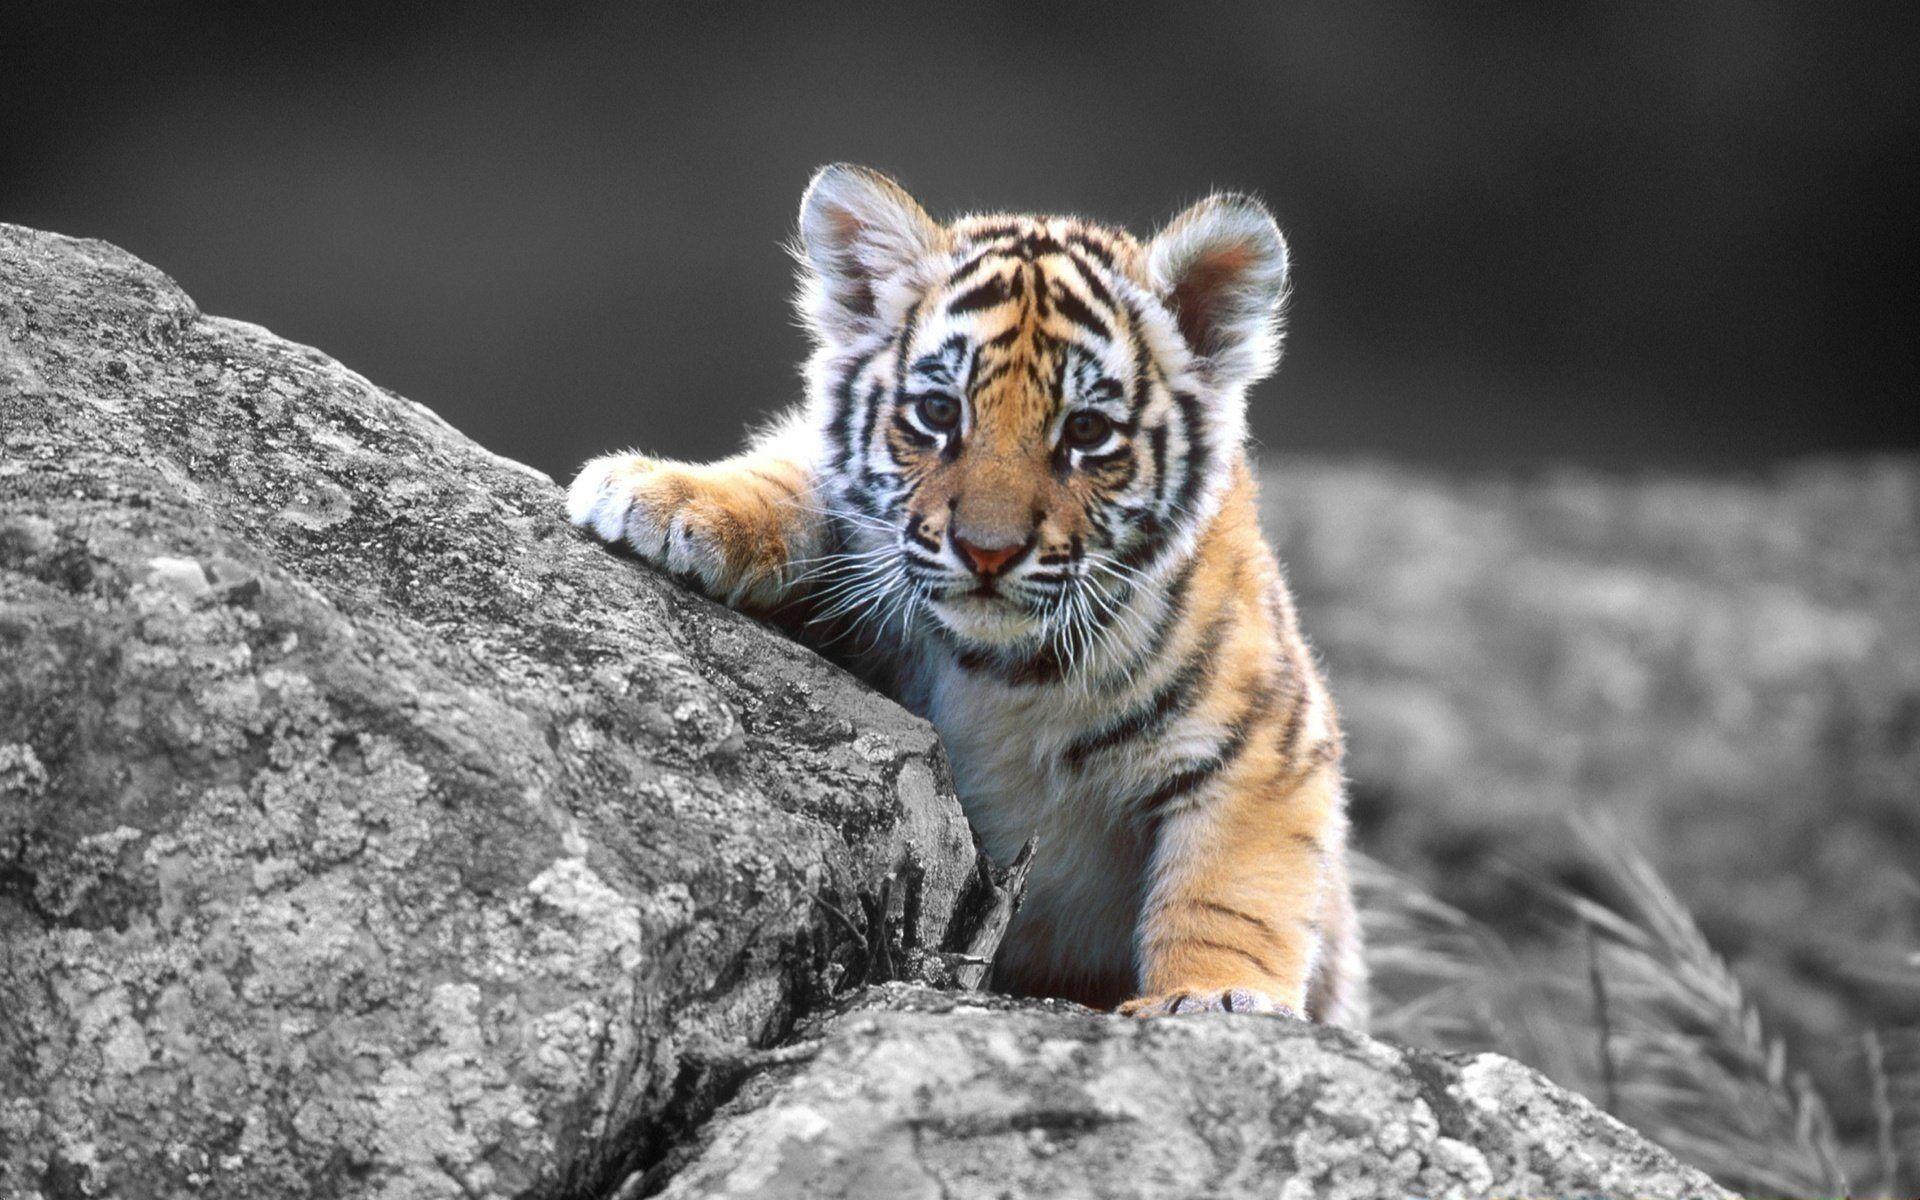 baby tiger image. Cute Tiger Baby Wallpaper Picture Photo